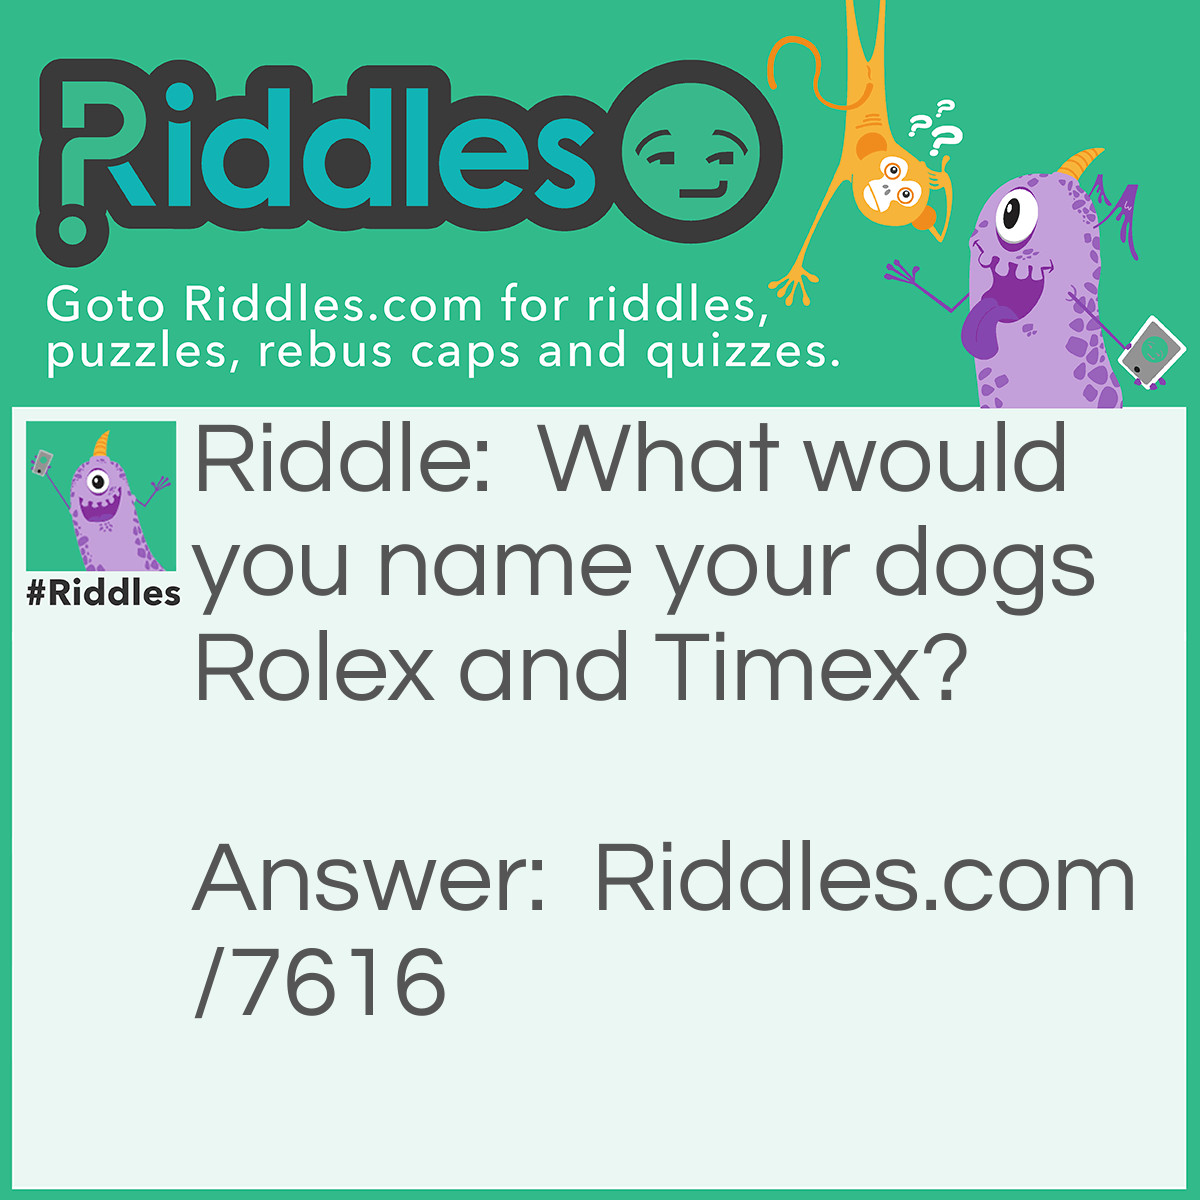 Riddle: What would you name your dogs Rolex and Timex? Answer: If you needed some watch dogs!